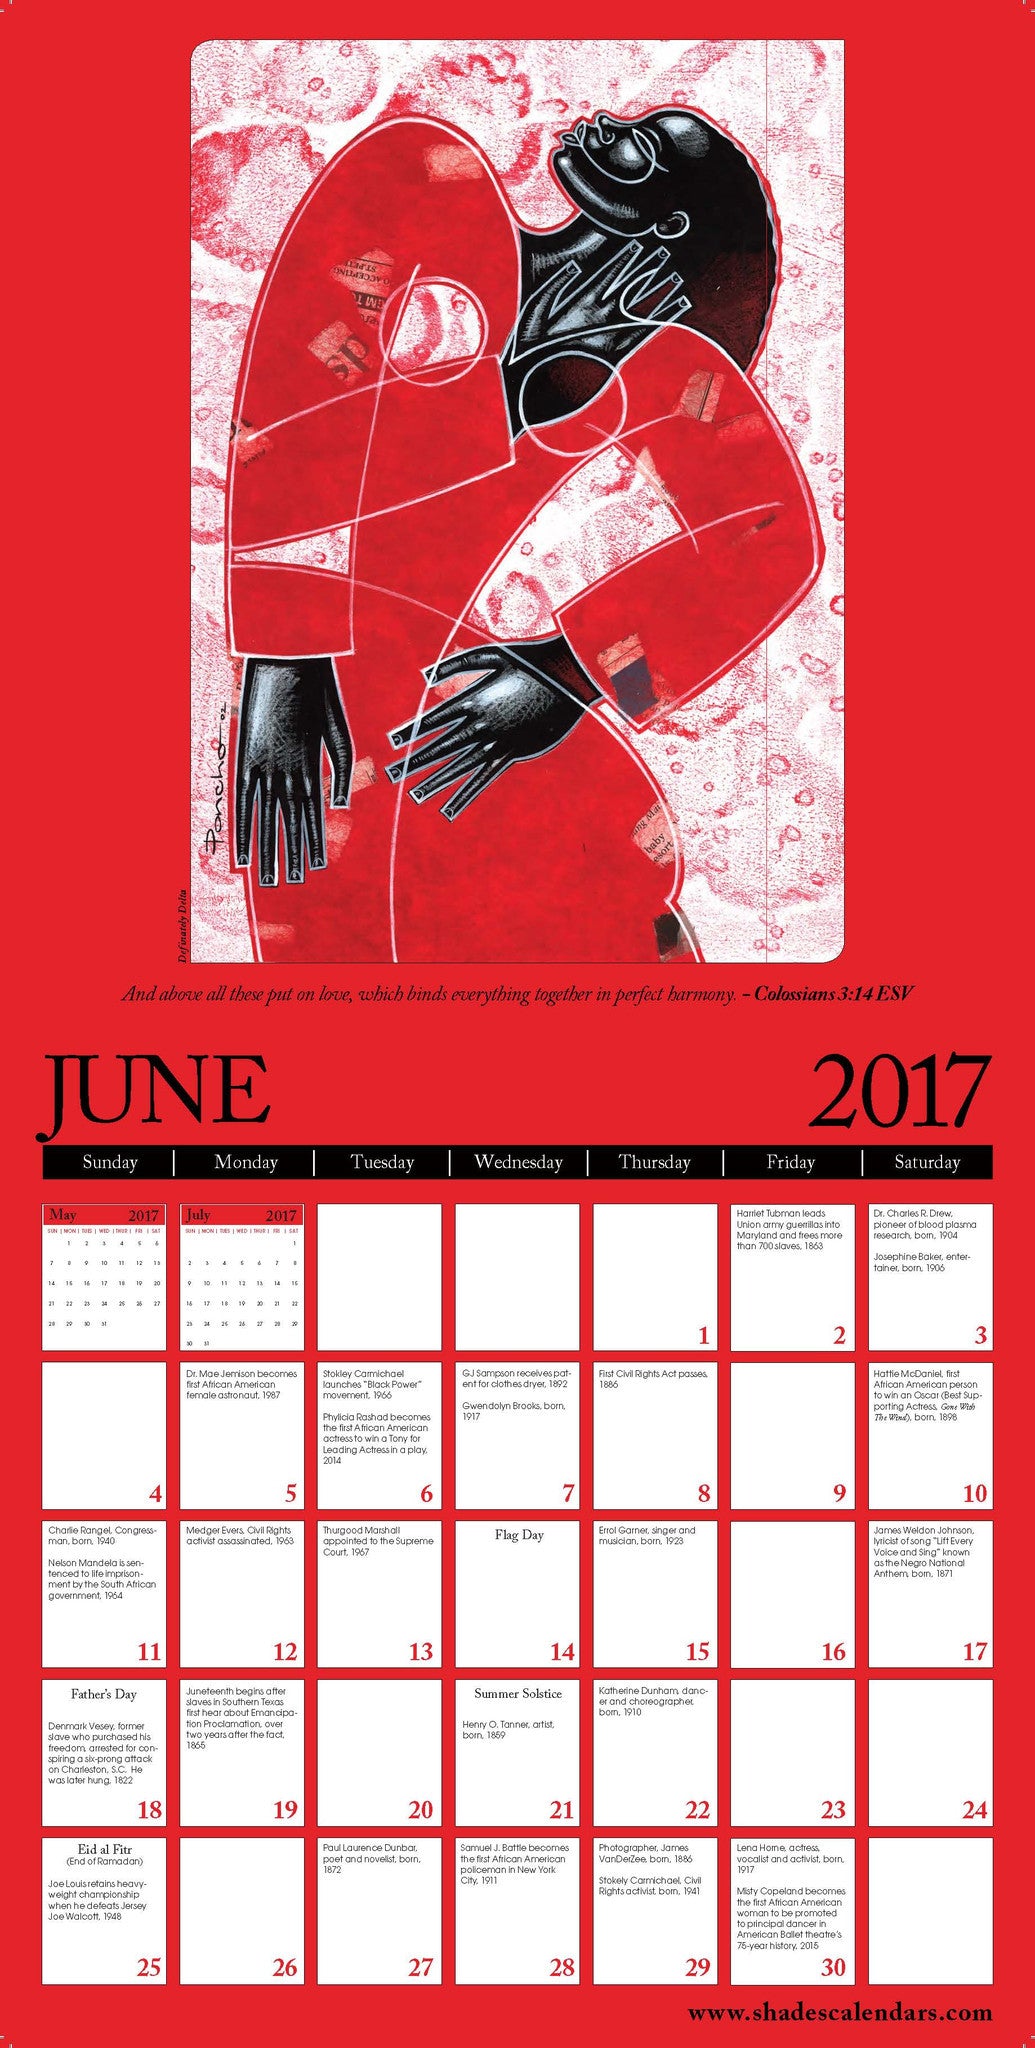 Color My Soul: The Art of Larry "Poncho" Brown (2017 African American Calendar)